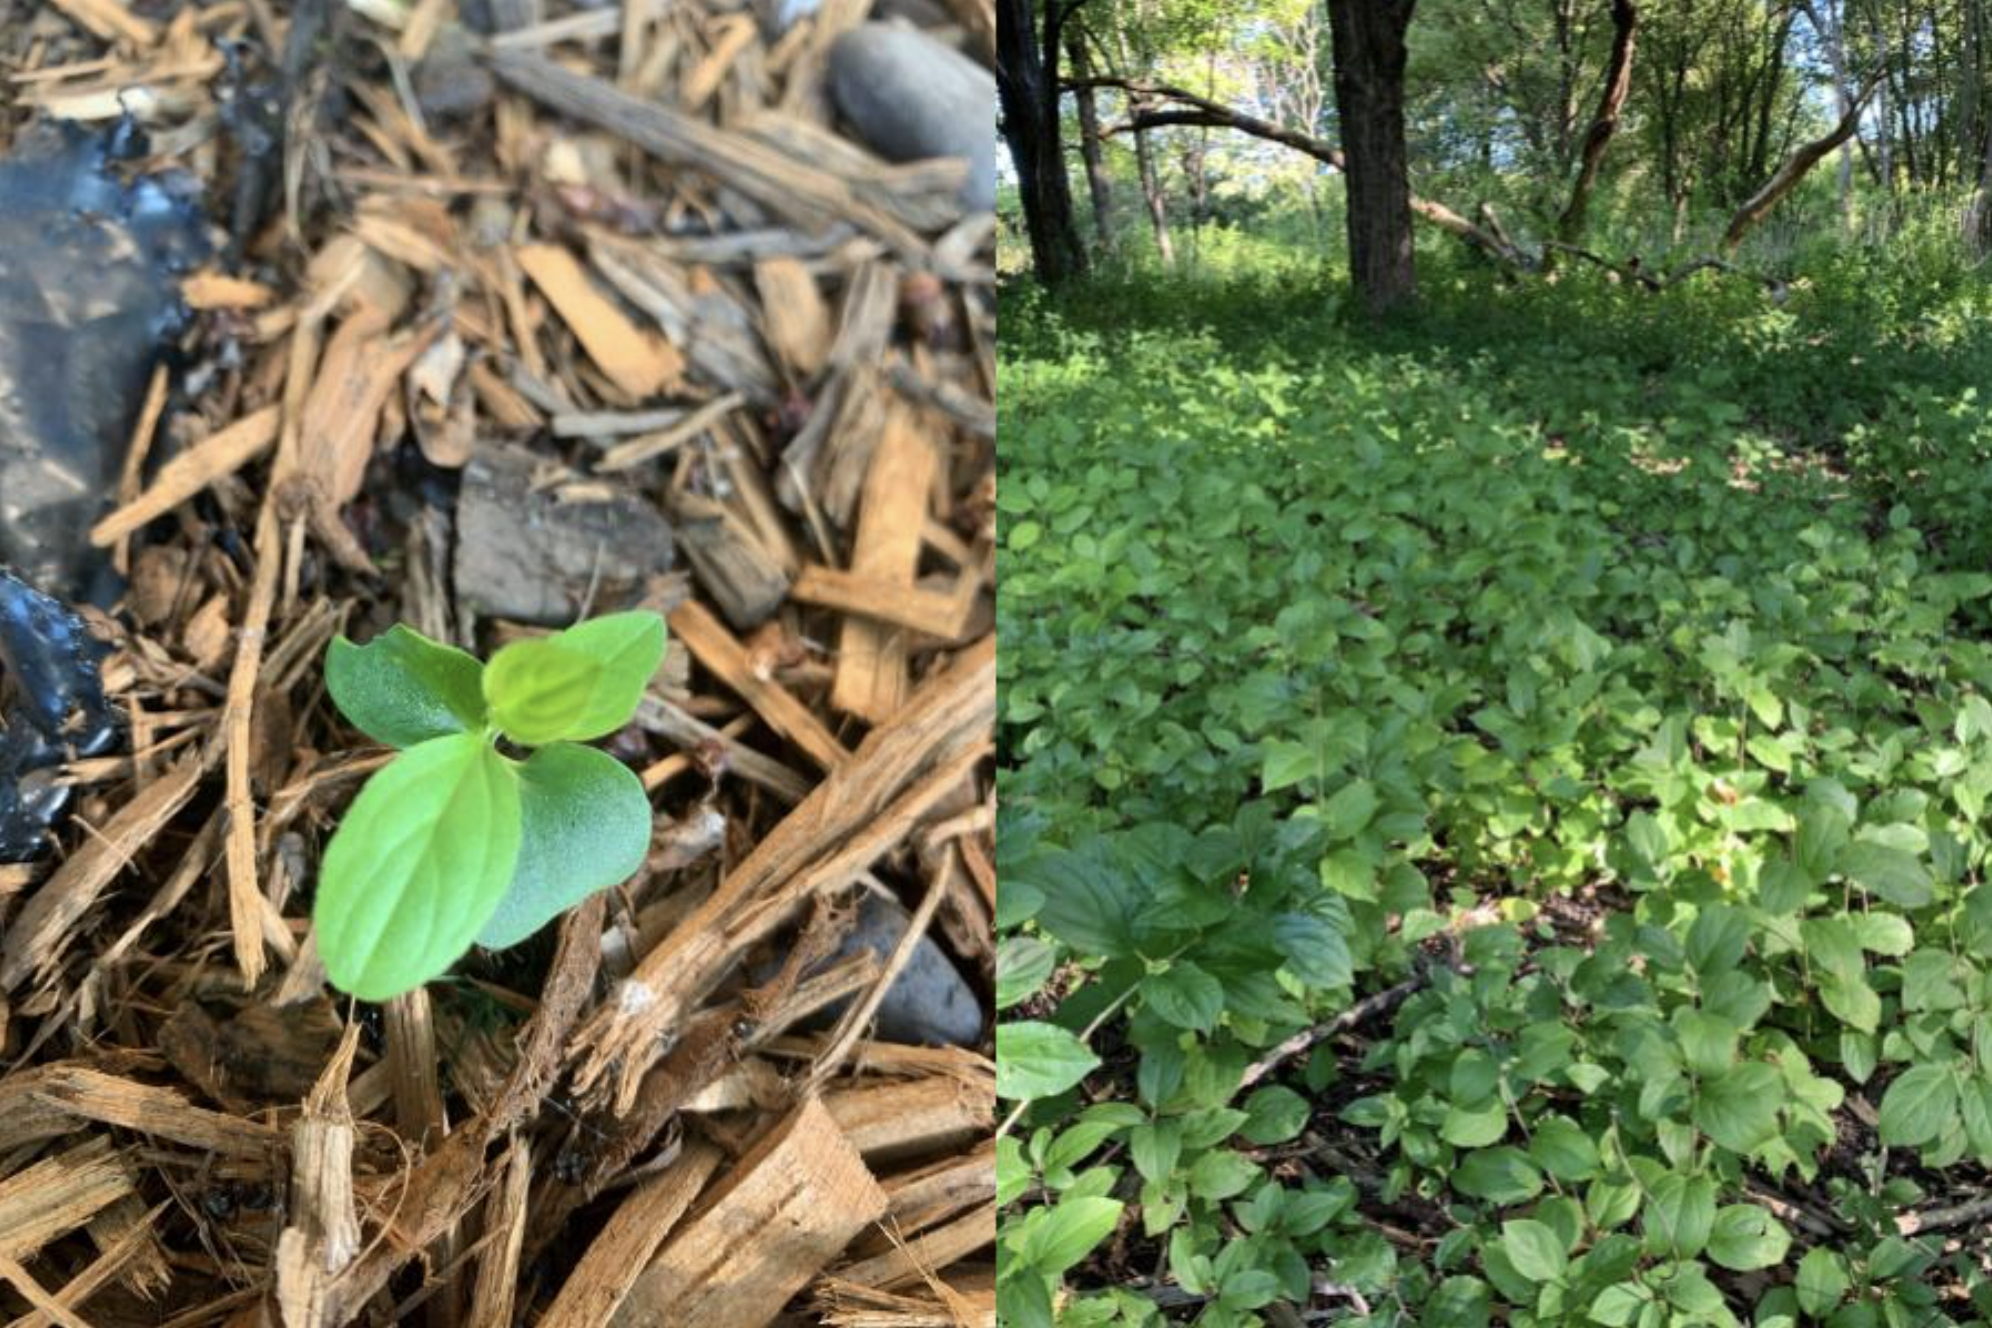 two photographs: left is a buckthorn seedling; right is forest floor covered in buckthorn seedlings